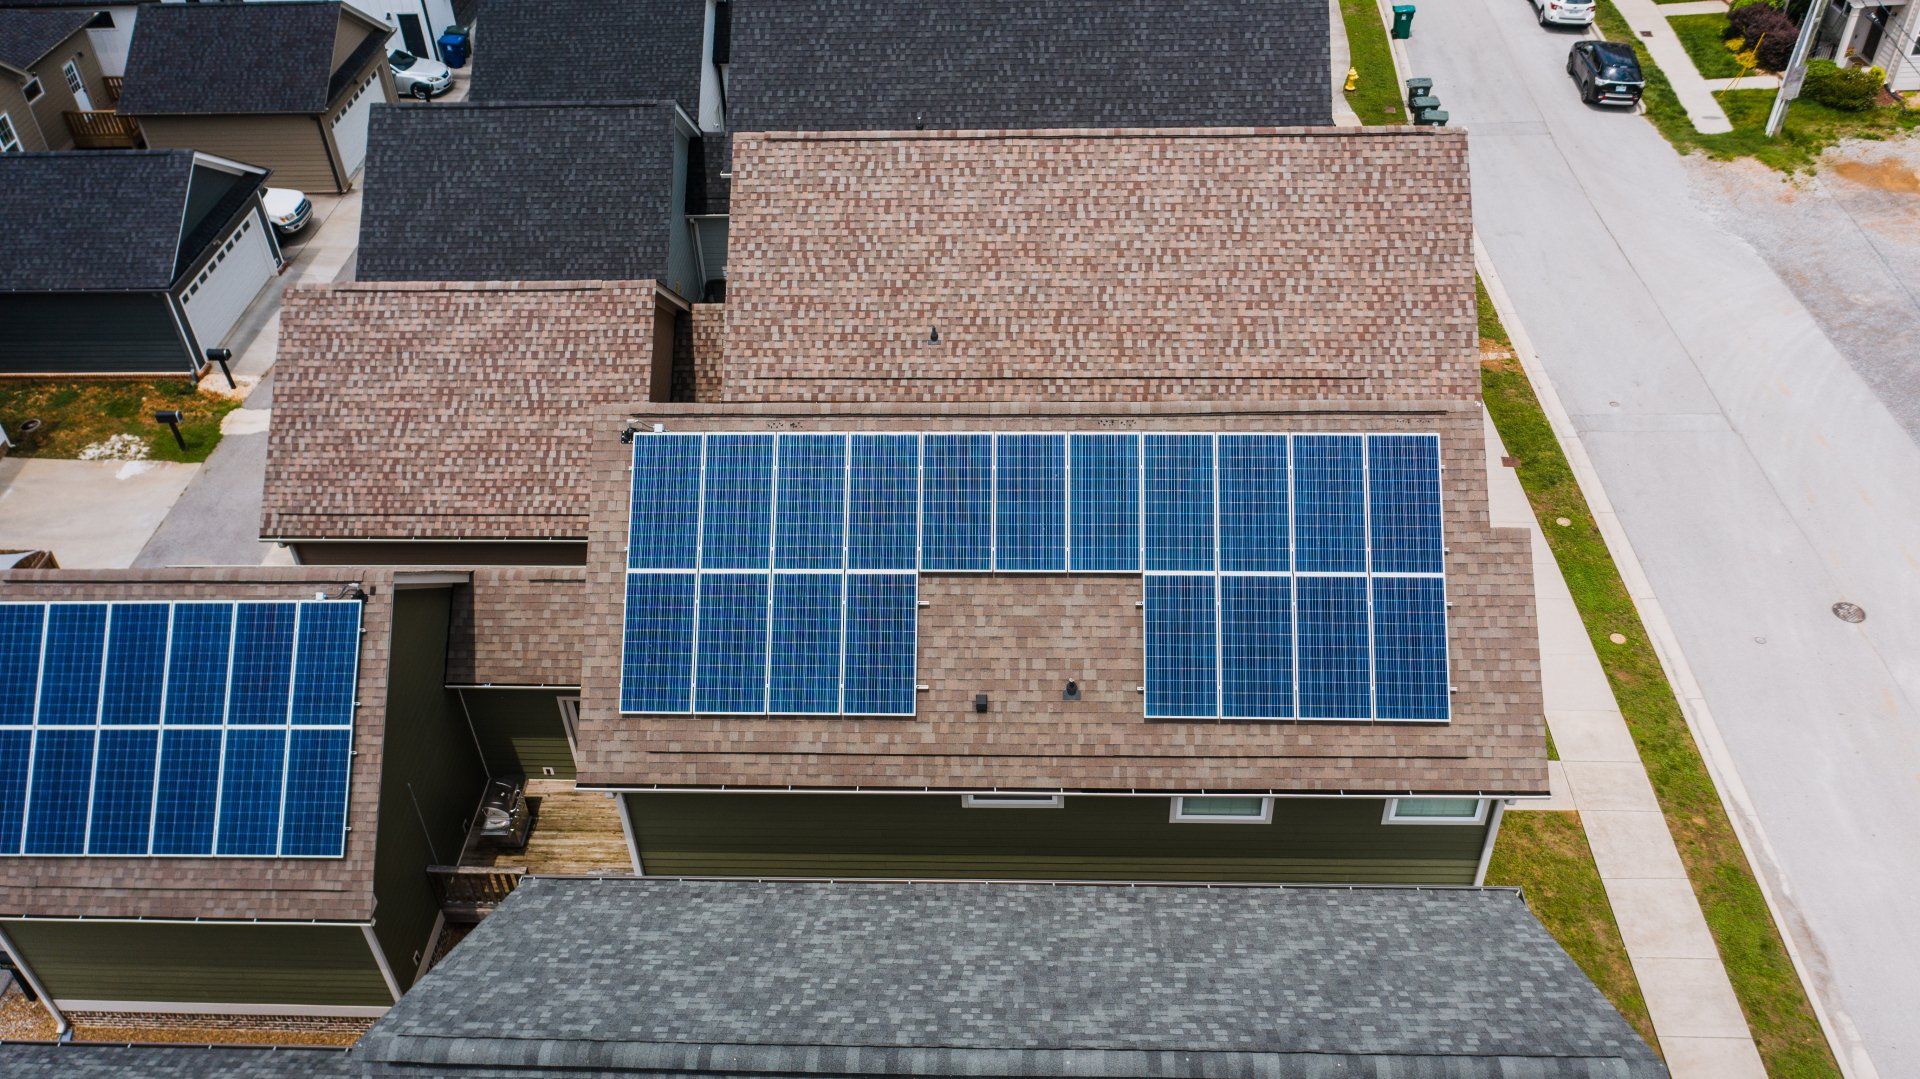 Aerial view of side-by-side roofs with solar panels